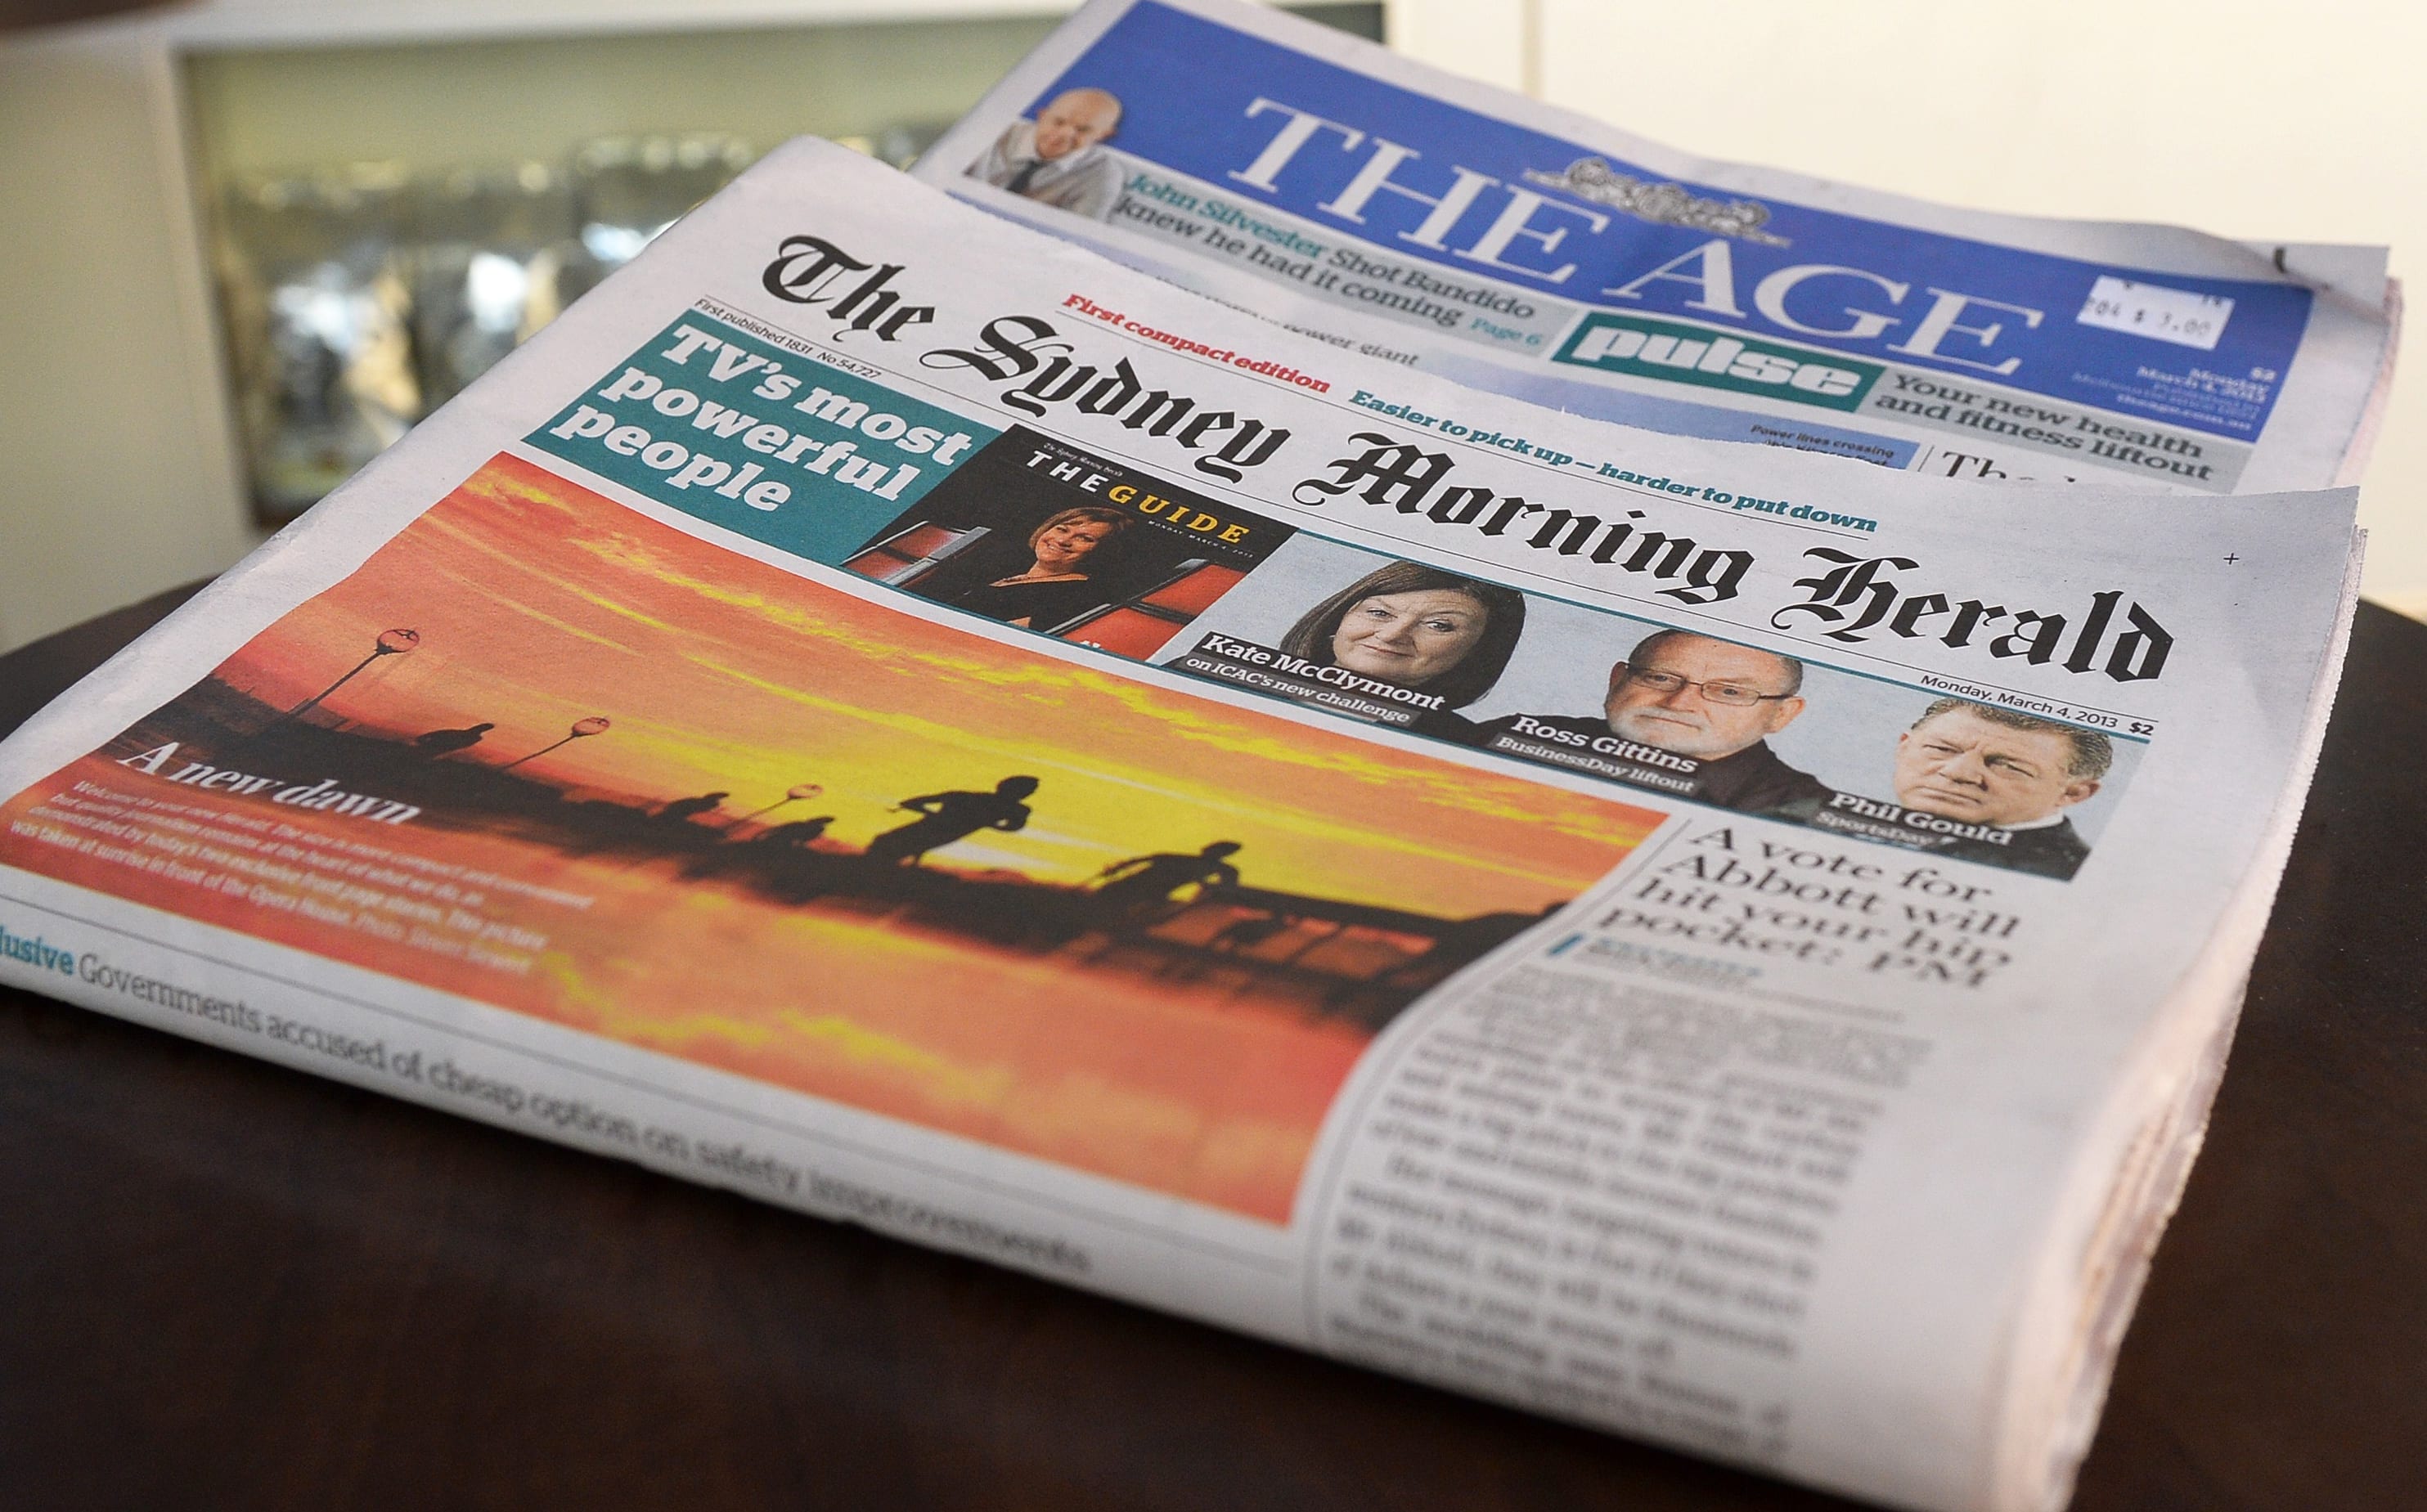 Fairfax titles The Age and Sydney Morning Herald.